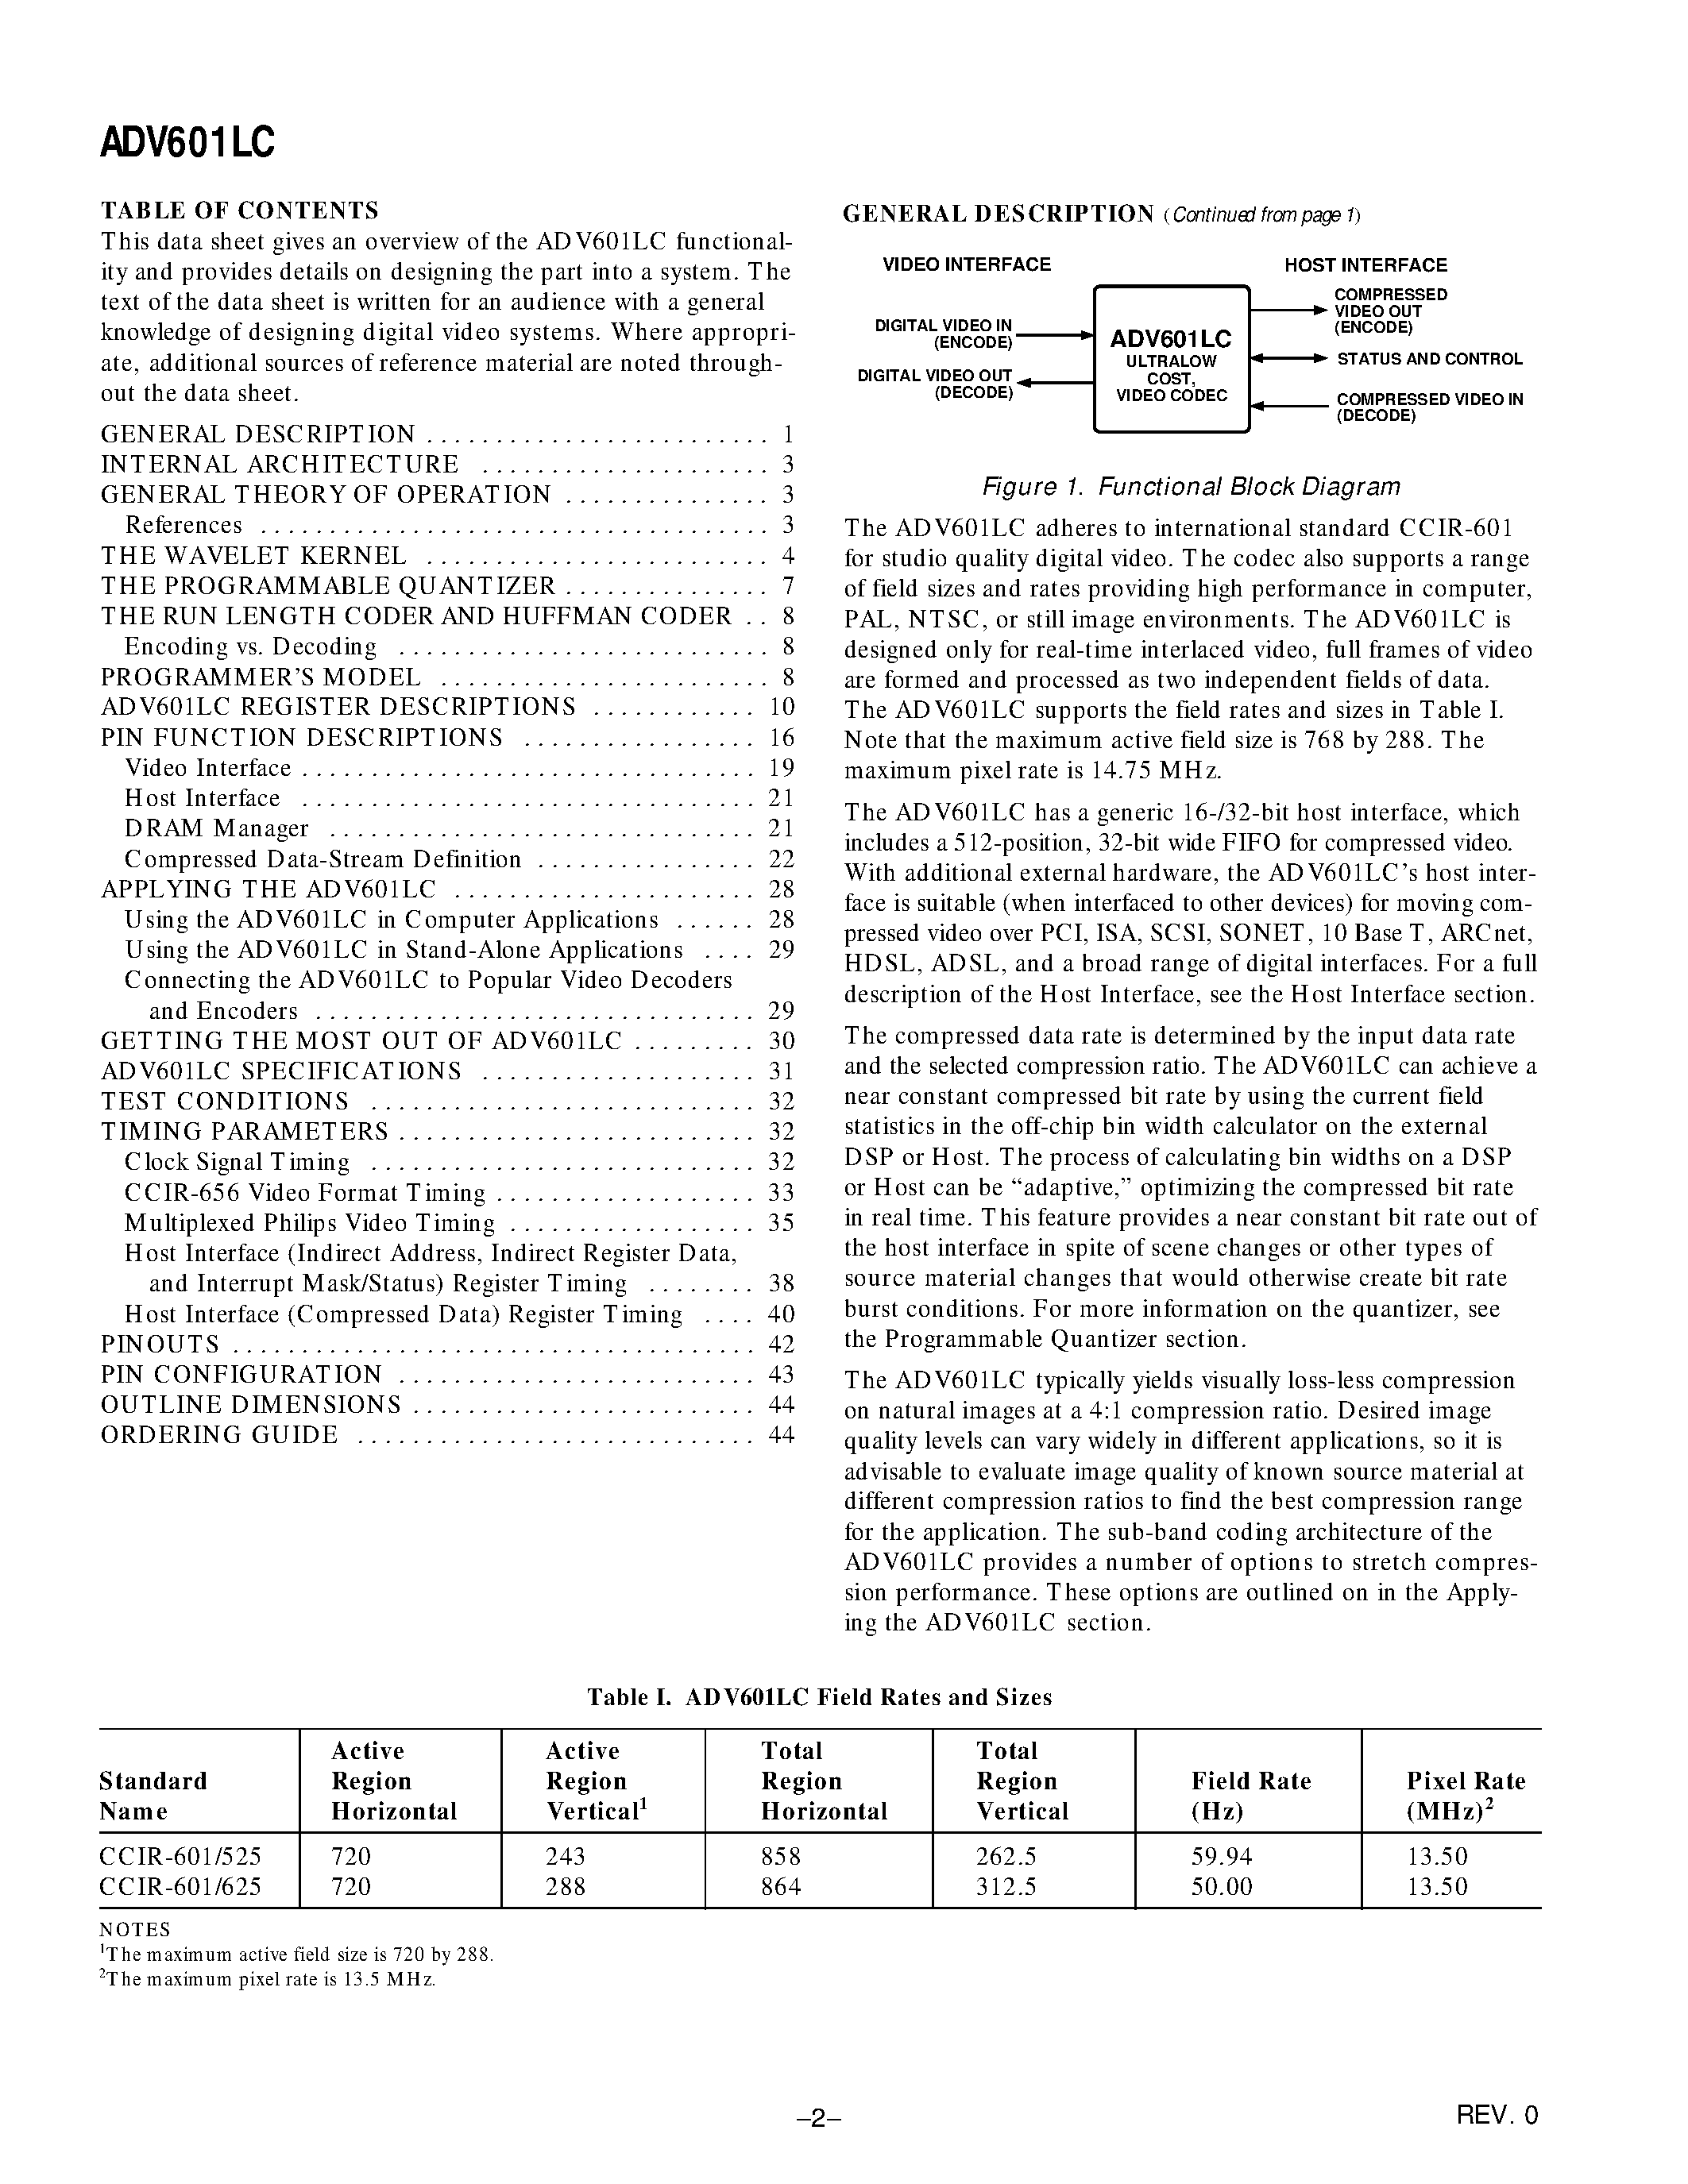 Datasheet ADV601LC - Ultralow Cost Video Codec page 2